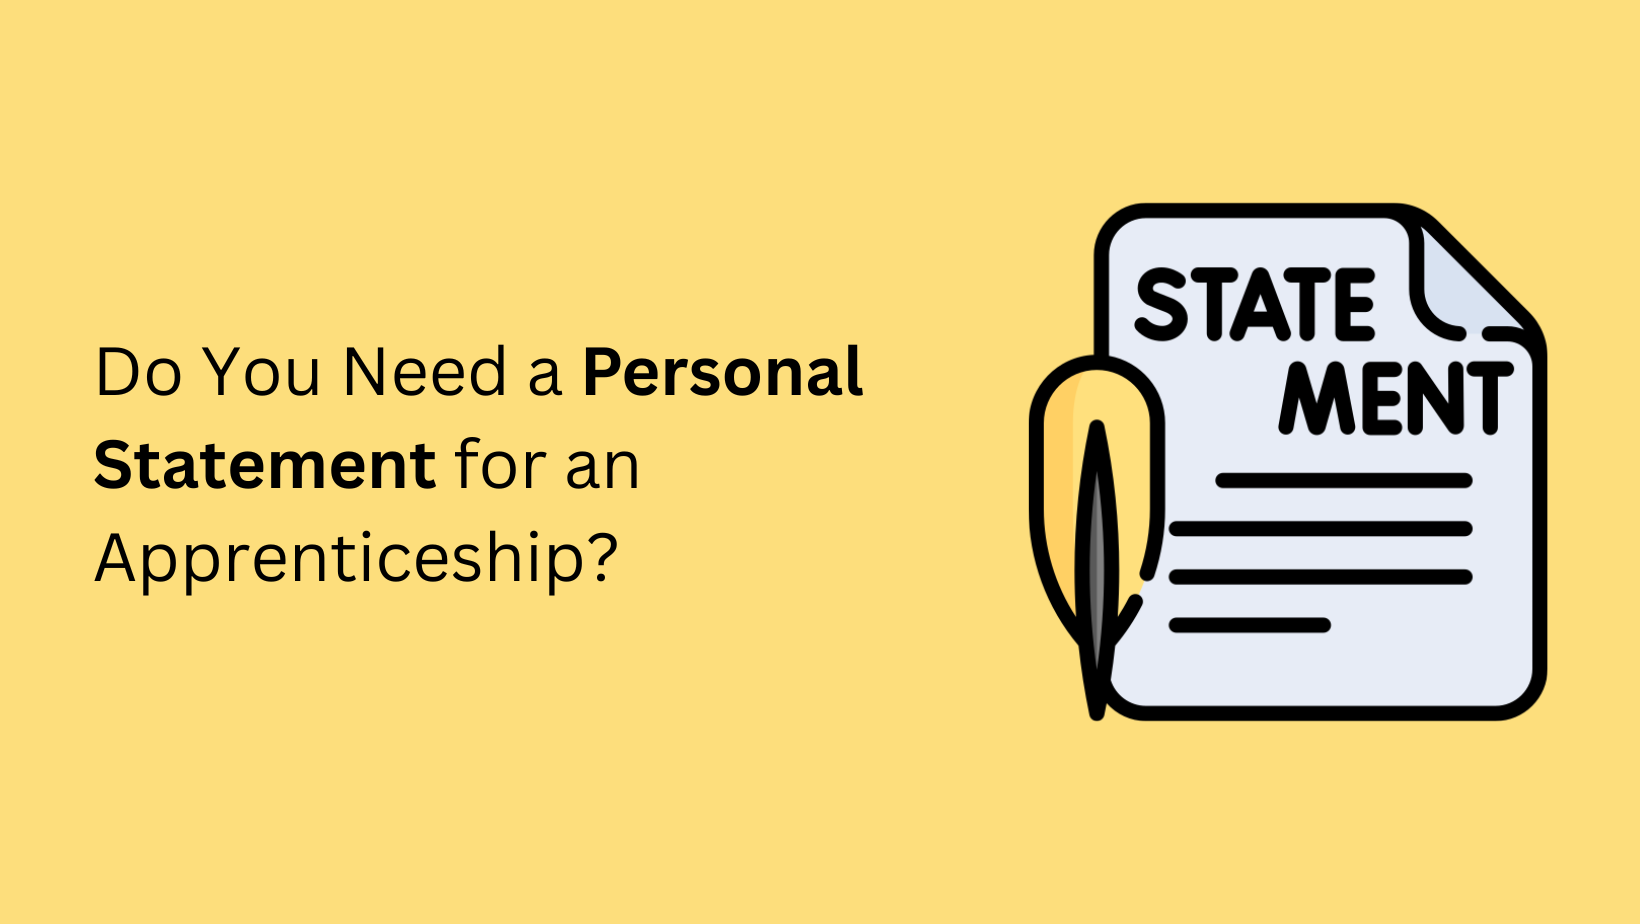 Do You Need a Personal Statement for an Apprenticeship